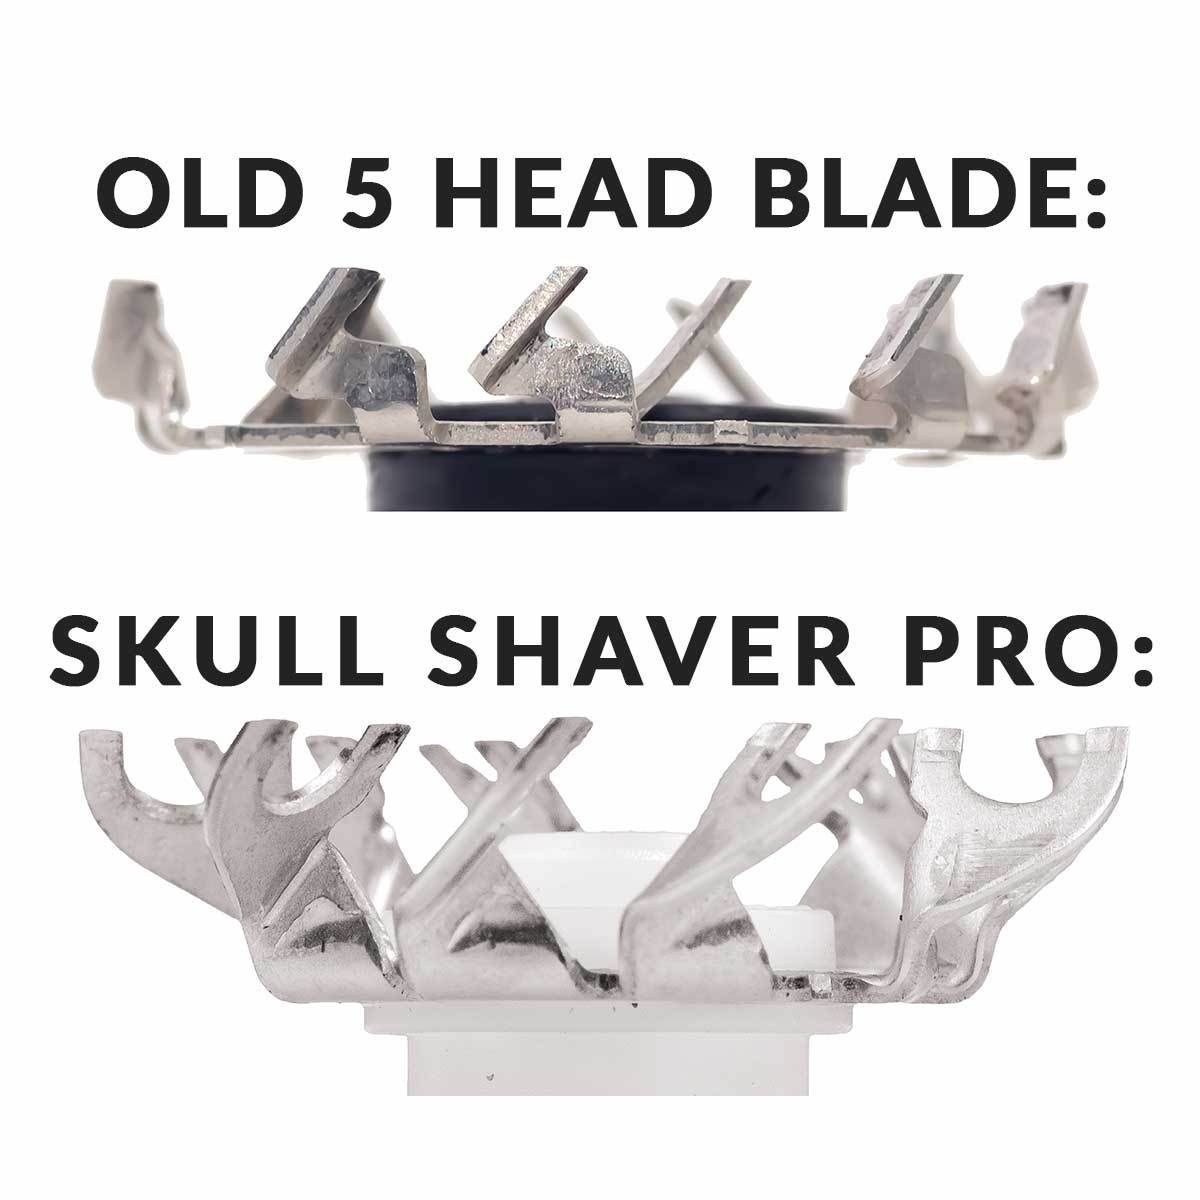 all new PRO blades are completely re-engineered as shown in this side by side comparison of new vs old pit bull shaver blades